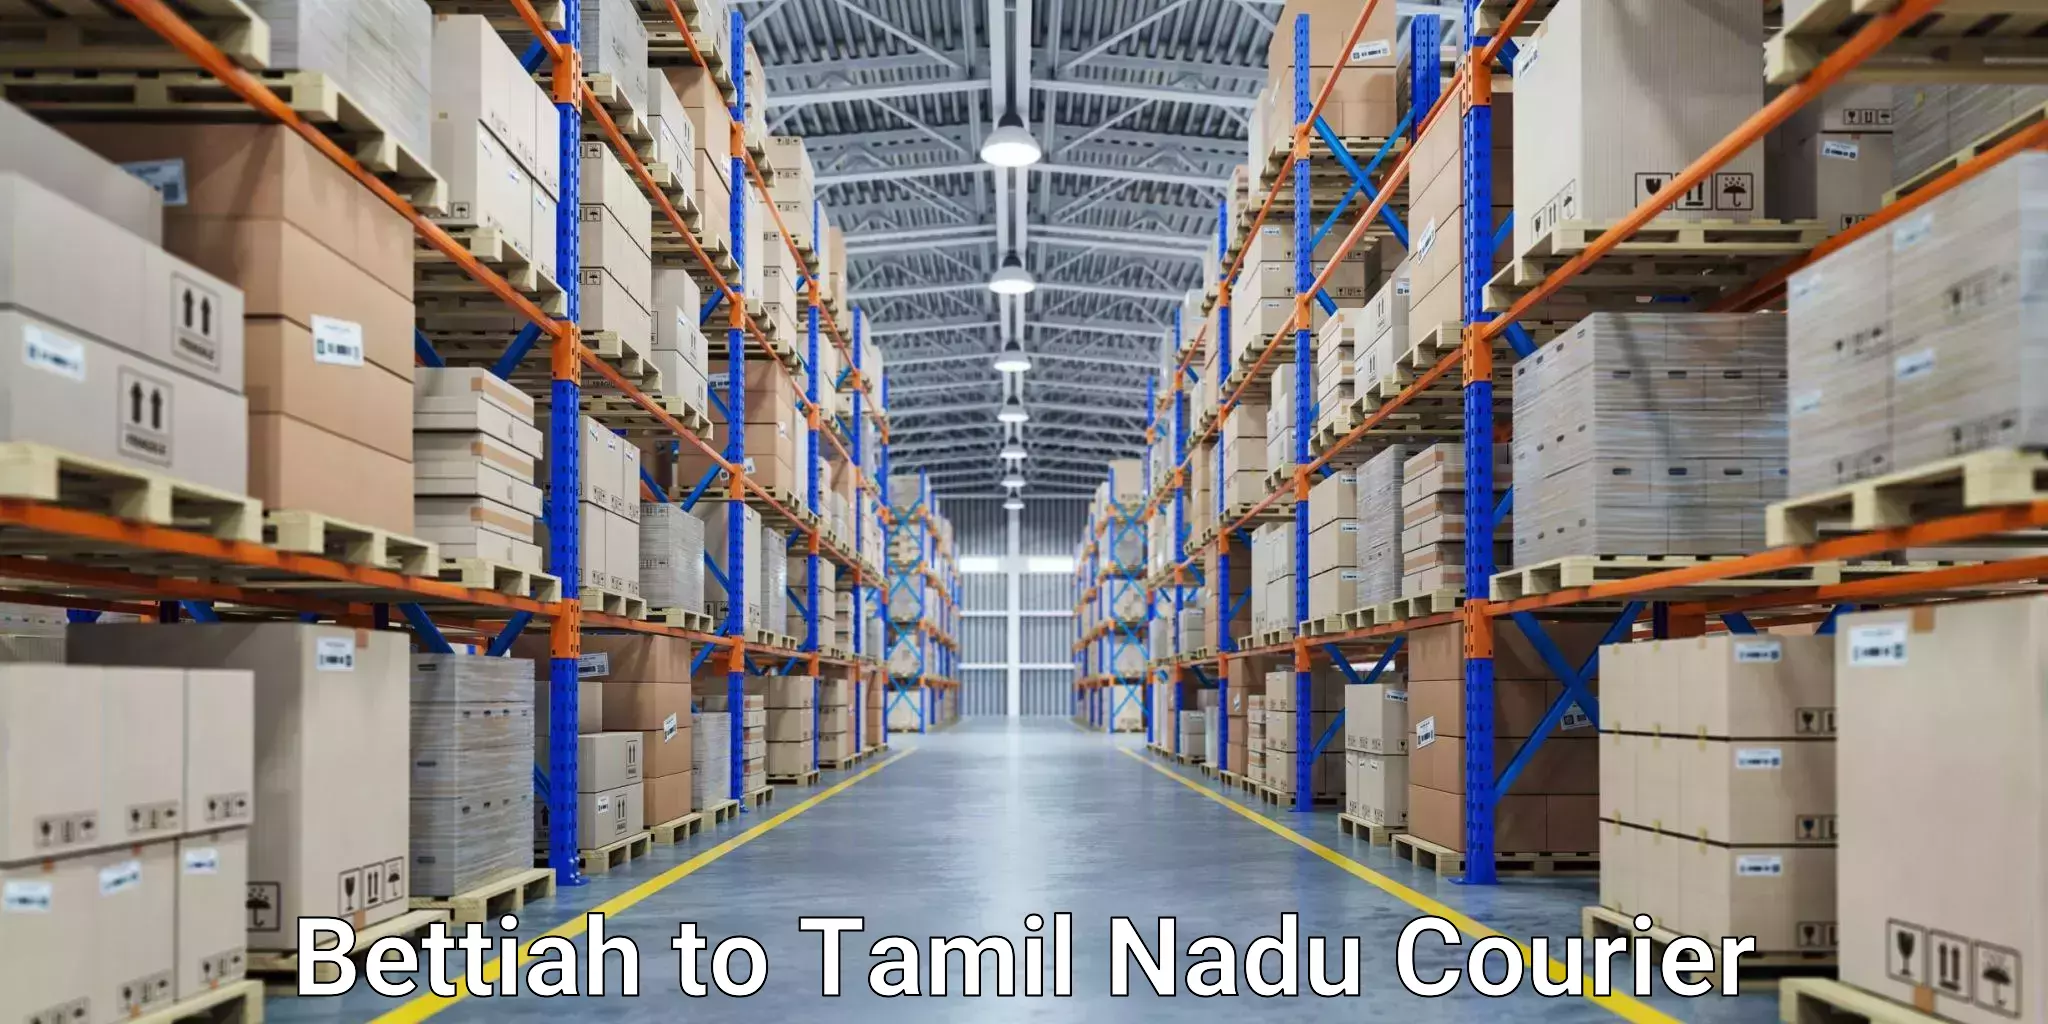 Nationwide parcel services Bettiah to Tuticorin Port